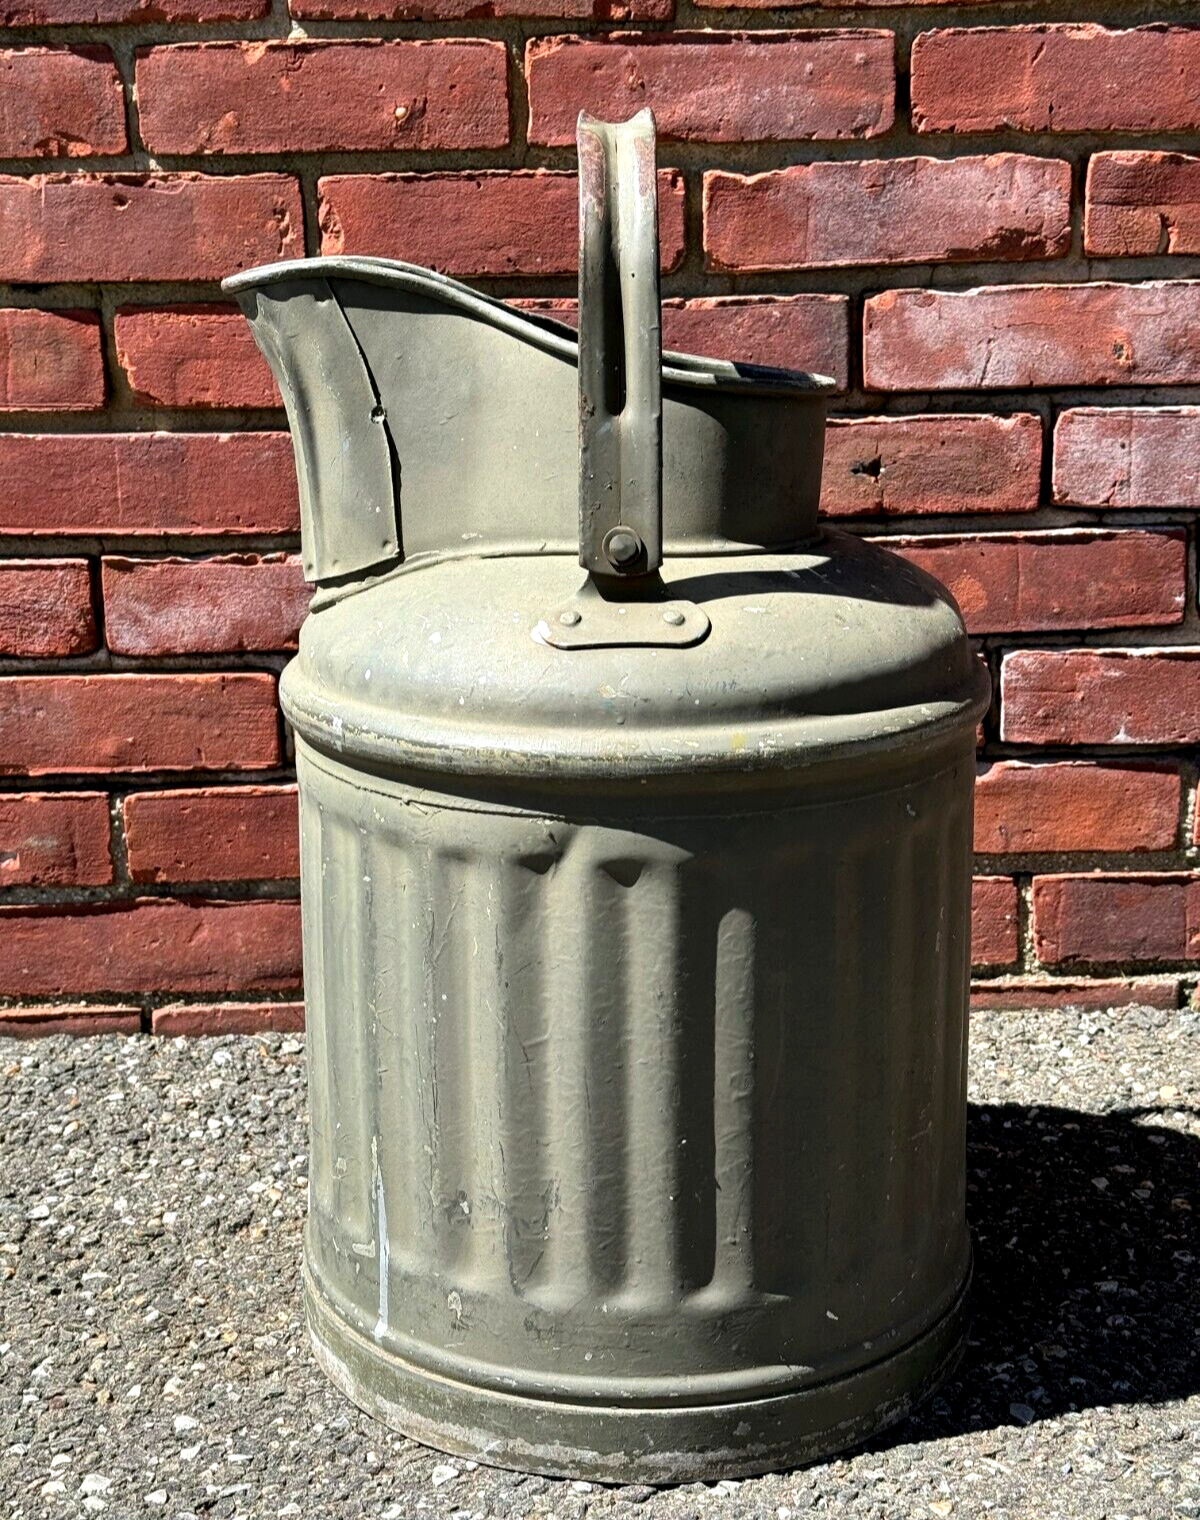 OLD VINTAGE ANTIQUE 5 GALLON FUEL OIL CAN DISPENSER ARMY MILITARY GREEN WWII ERA